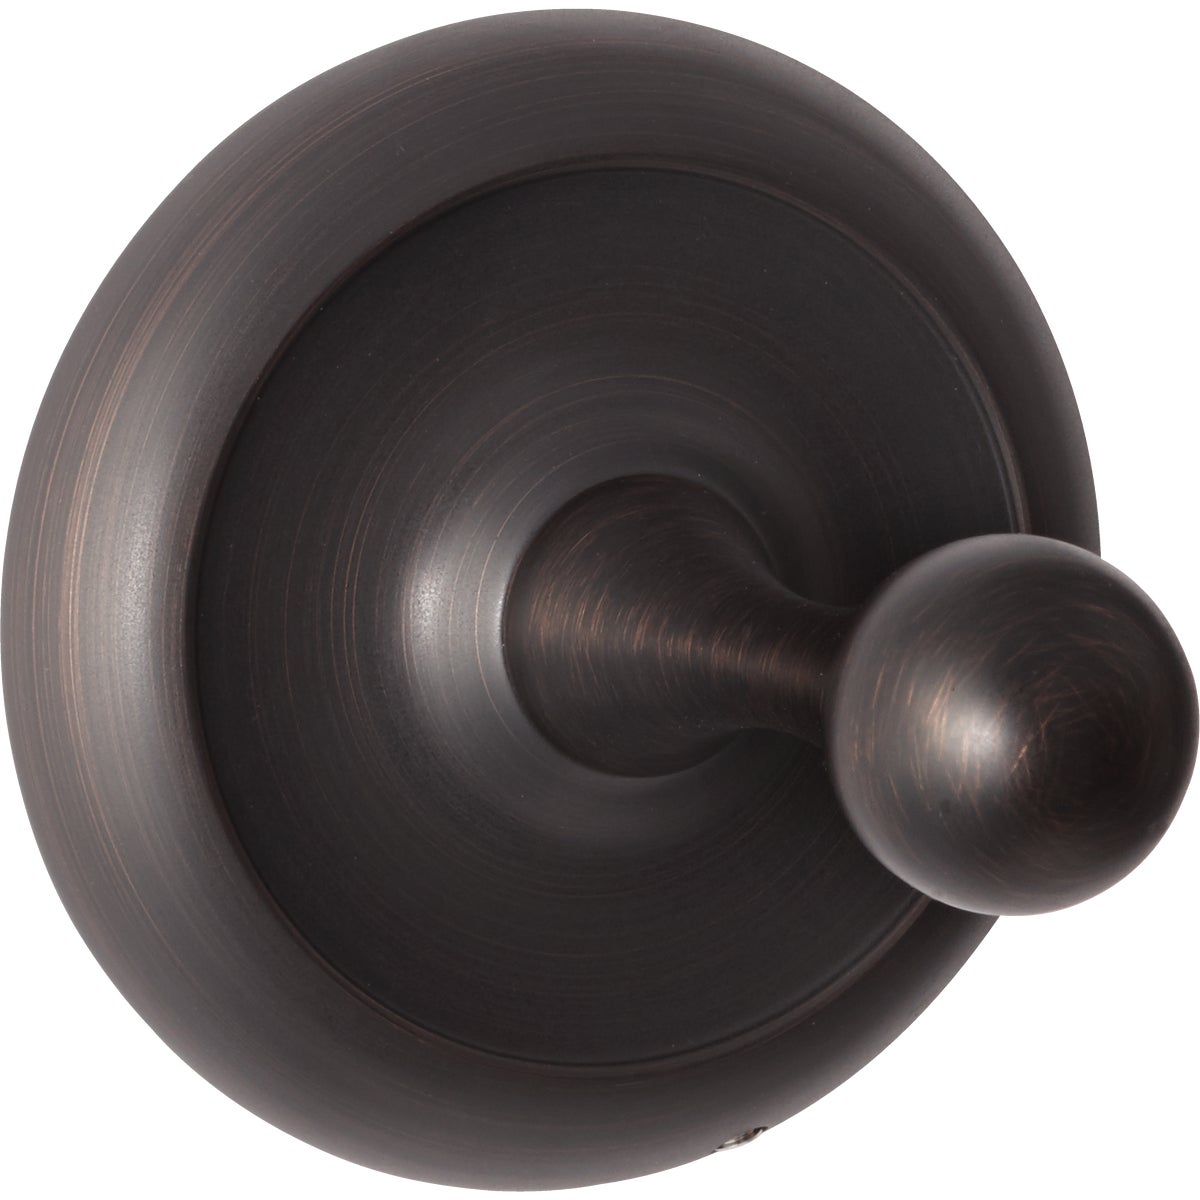 Home Impressions Aria Oil Rubbed Bronze Single Robe Hook